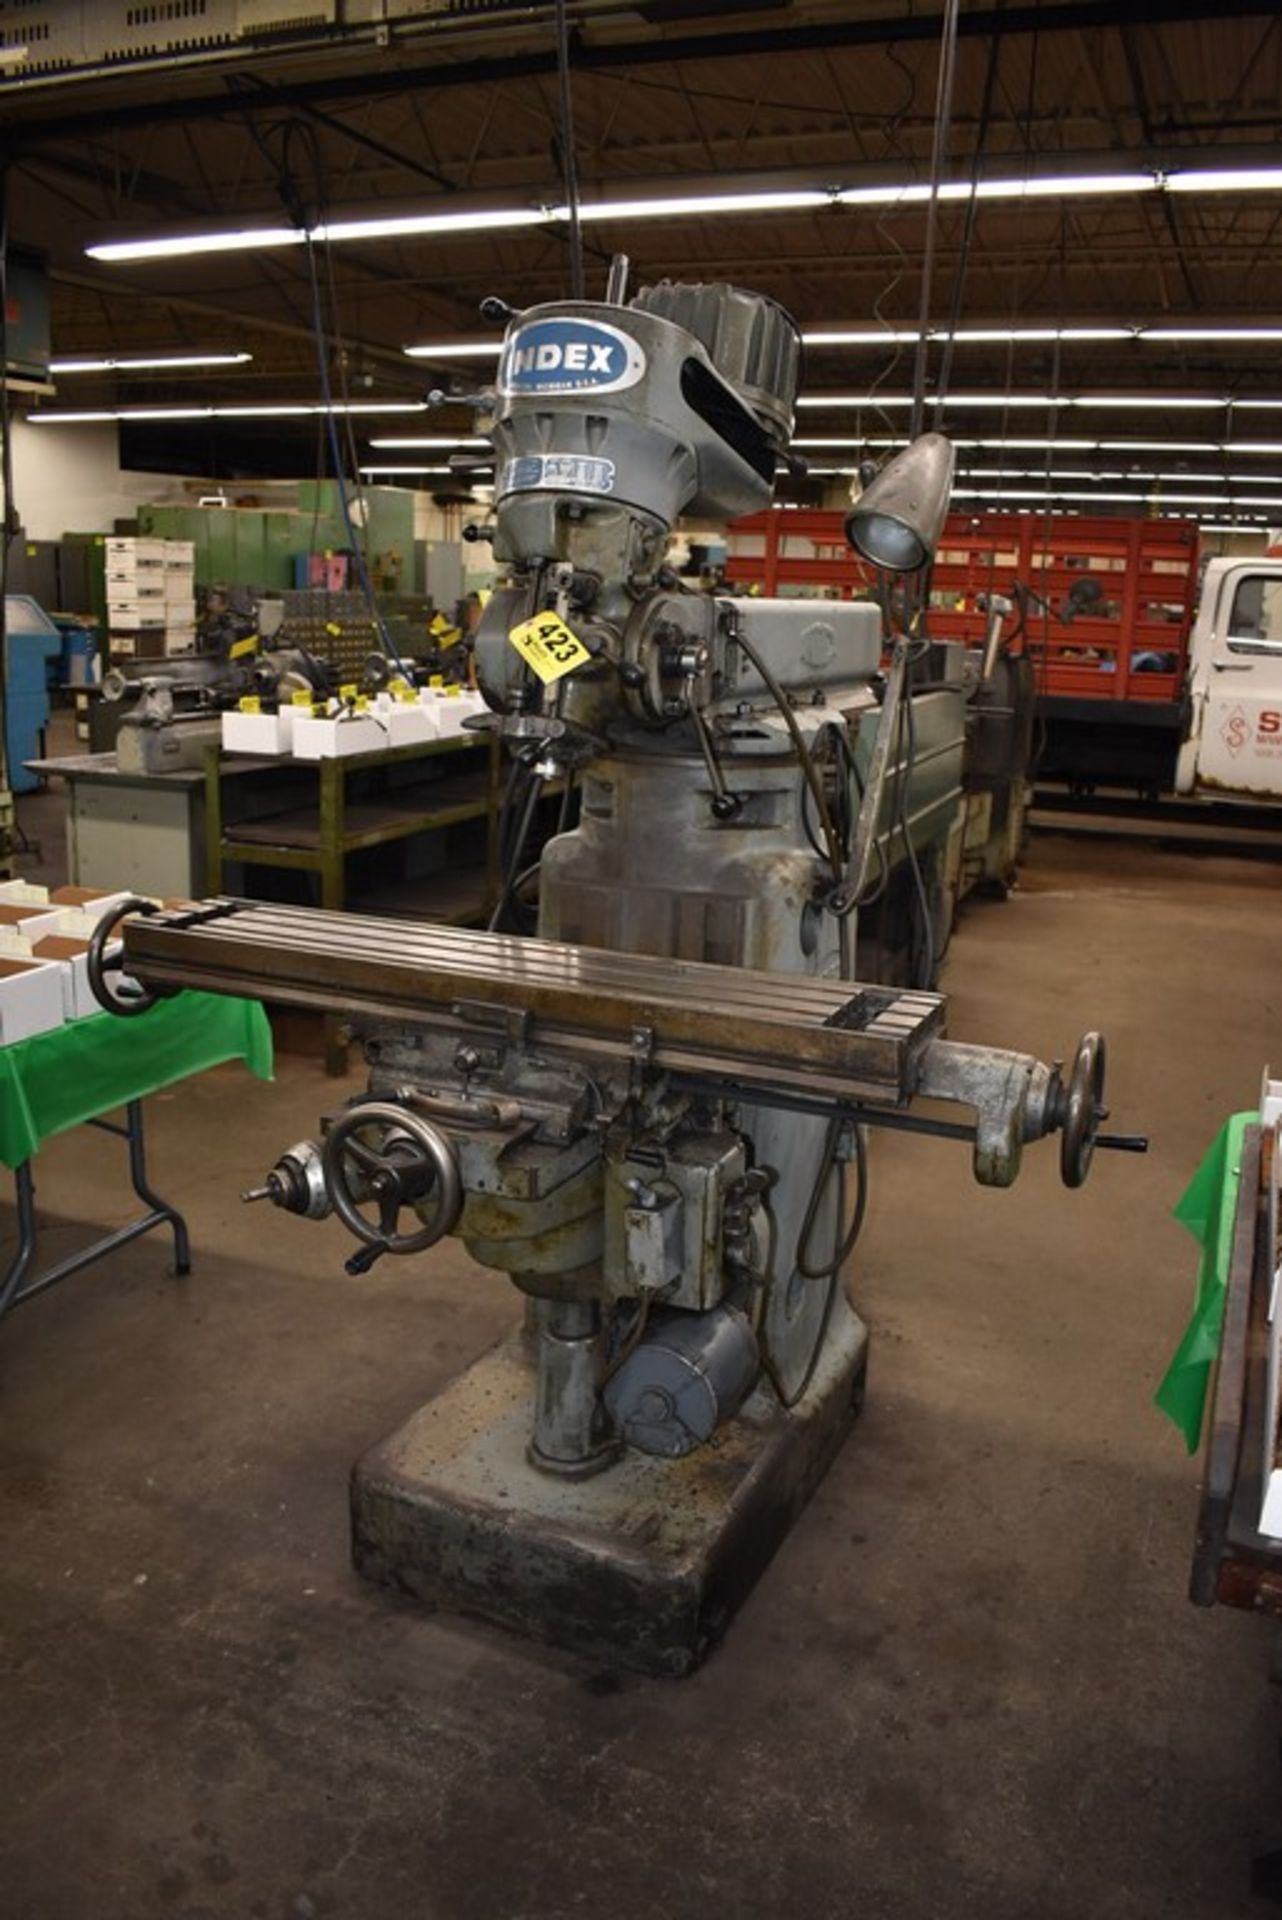 INDEX 2 HP MODEL 845 VERTICAL MILL, S/N 13050, 46" TABLE - Image 6 of 7